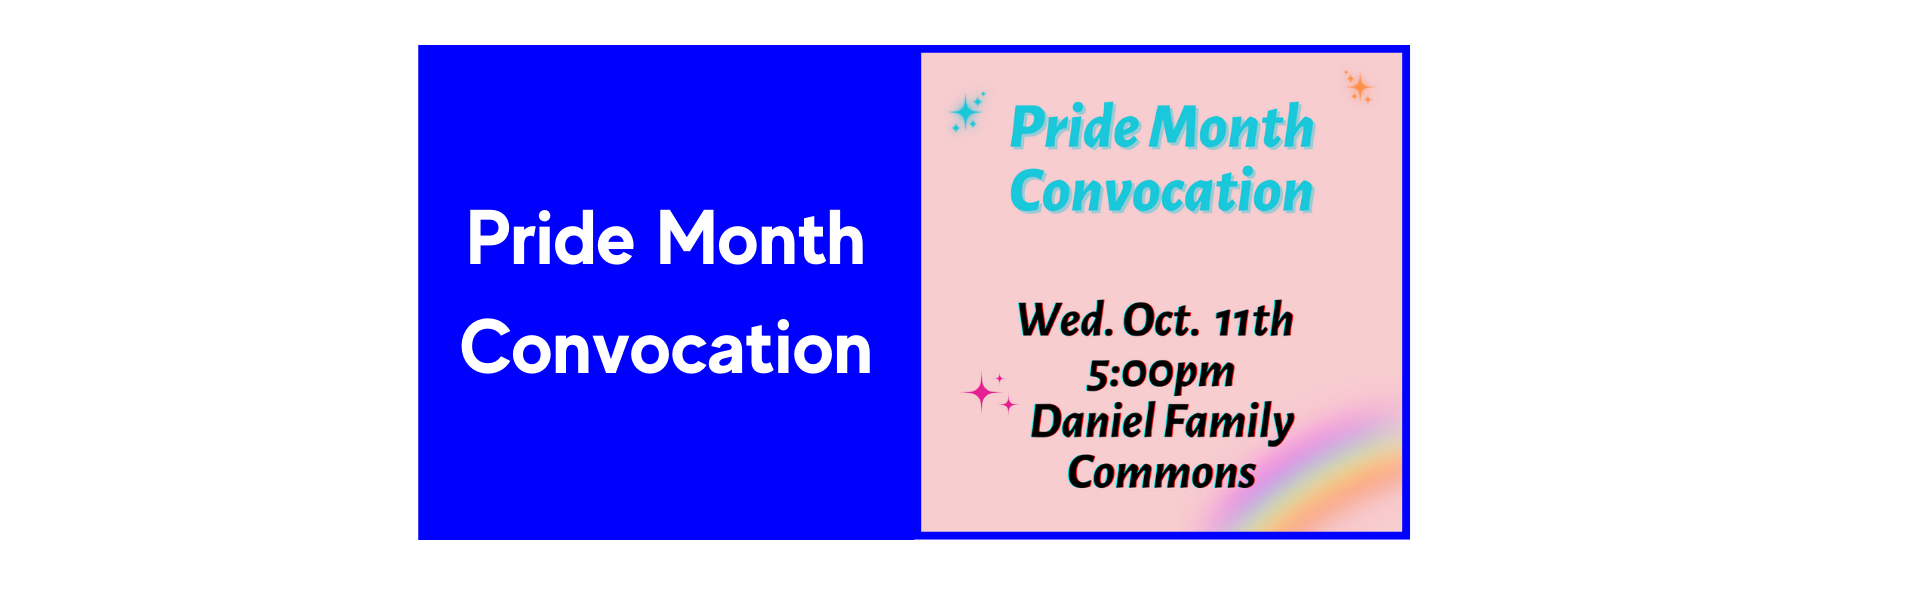 Pride-Month-Convocation.png